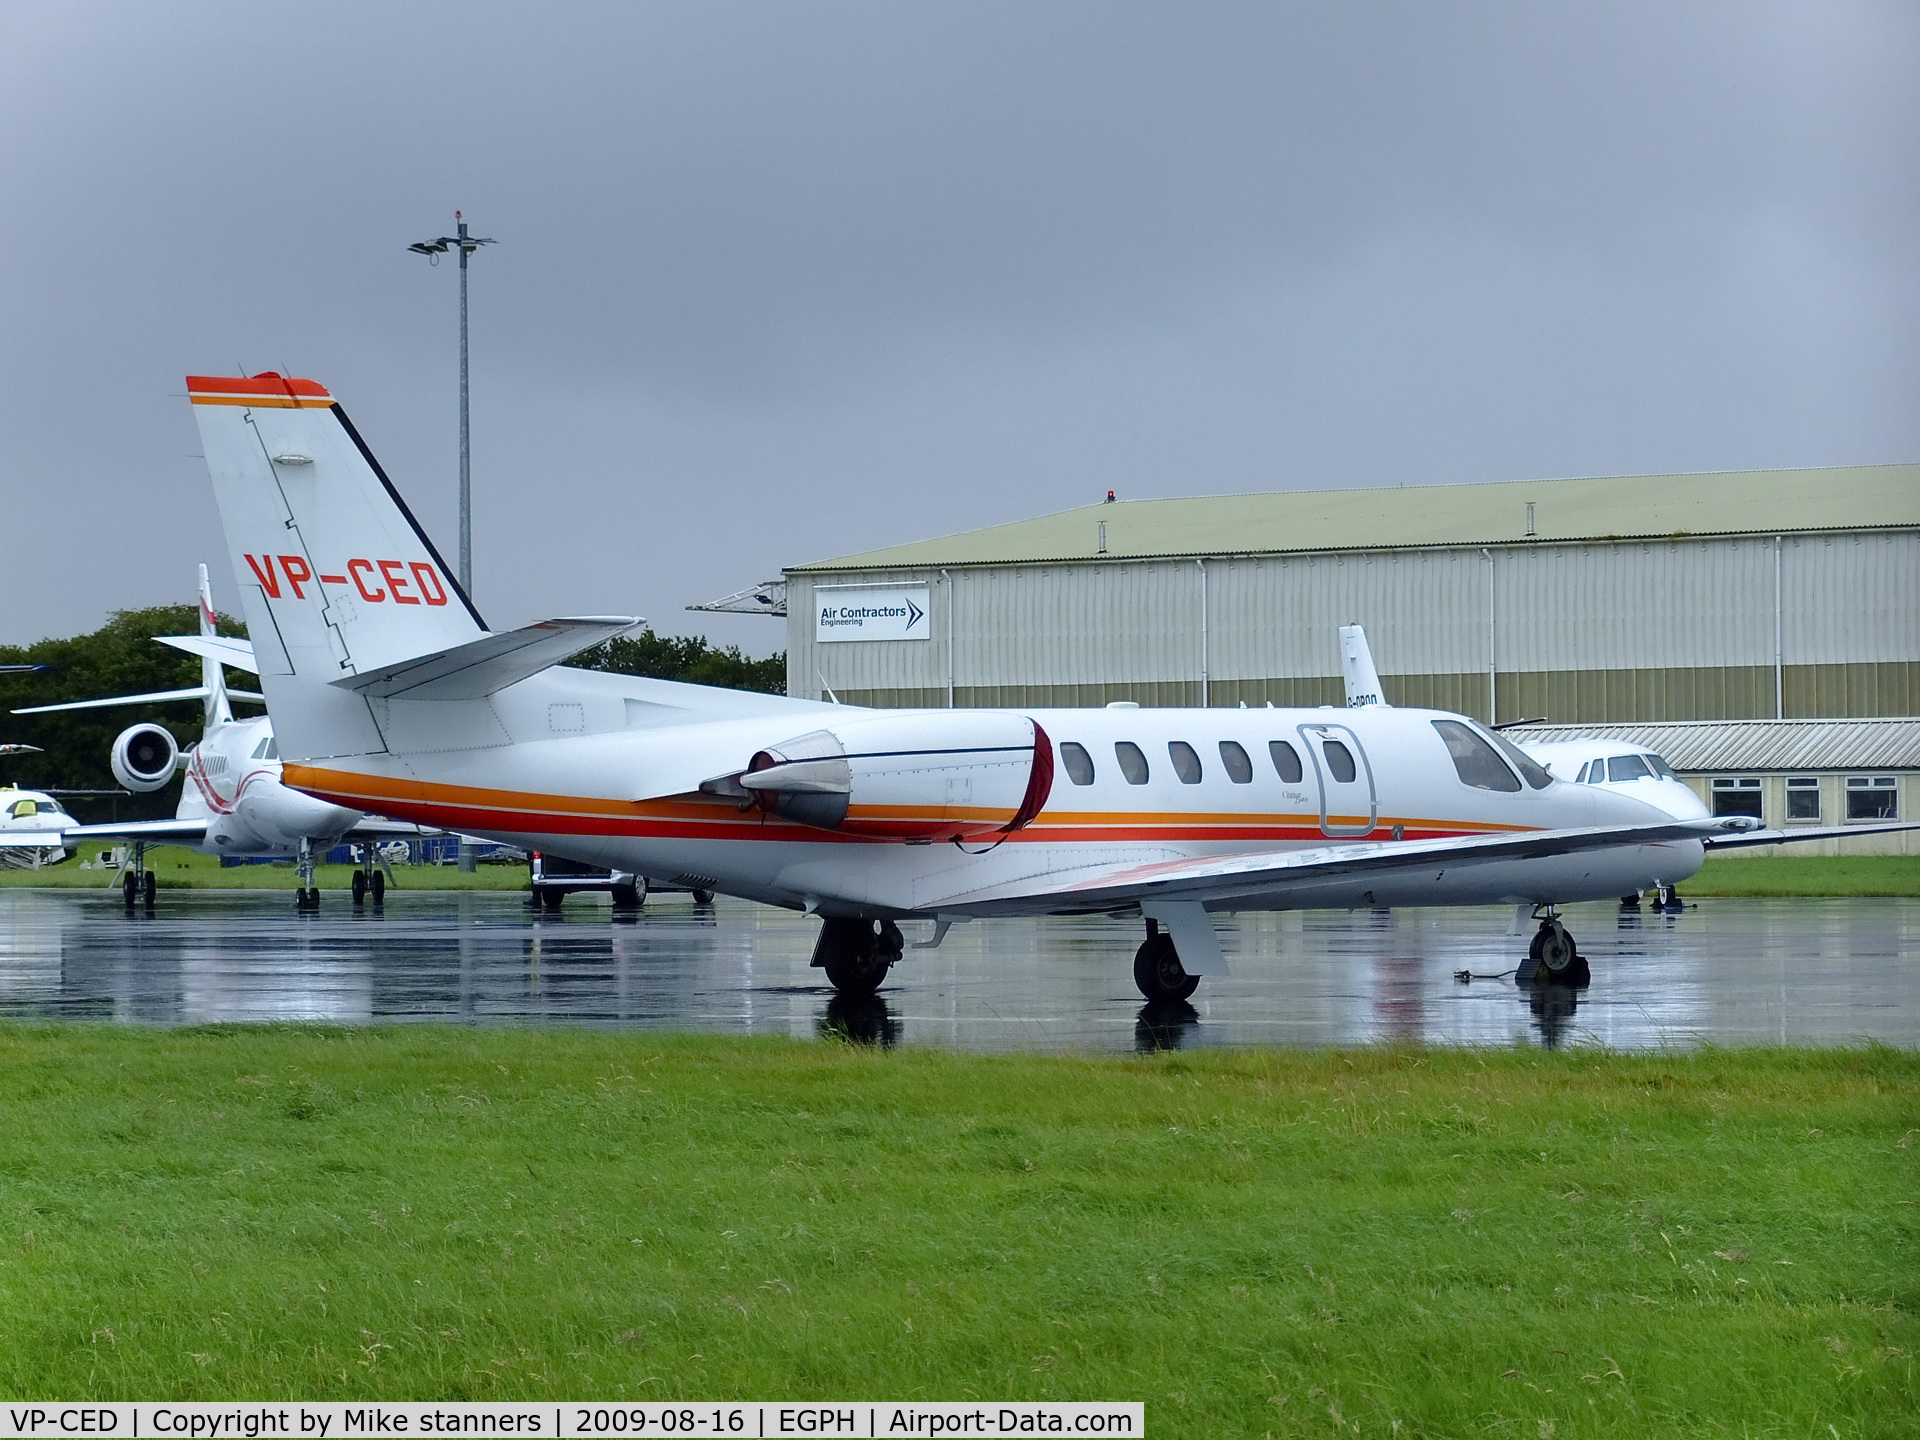 VP-CED, 1999 Cessna 550 Citation Bravo C/N 550-0870, cessna 550 citation bravo ,owned by Iceland,is seen here at a wet EDI